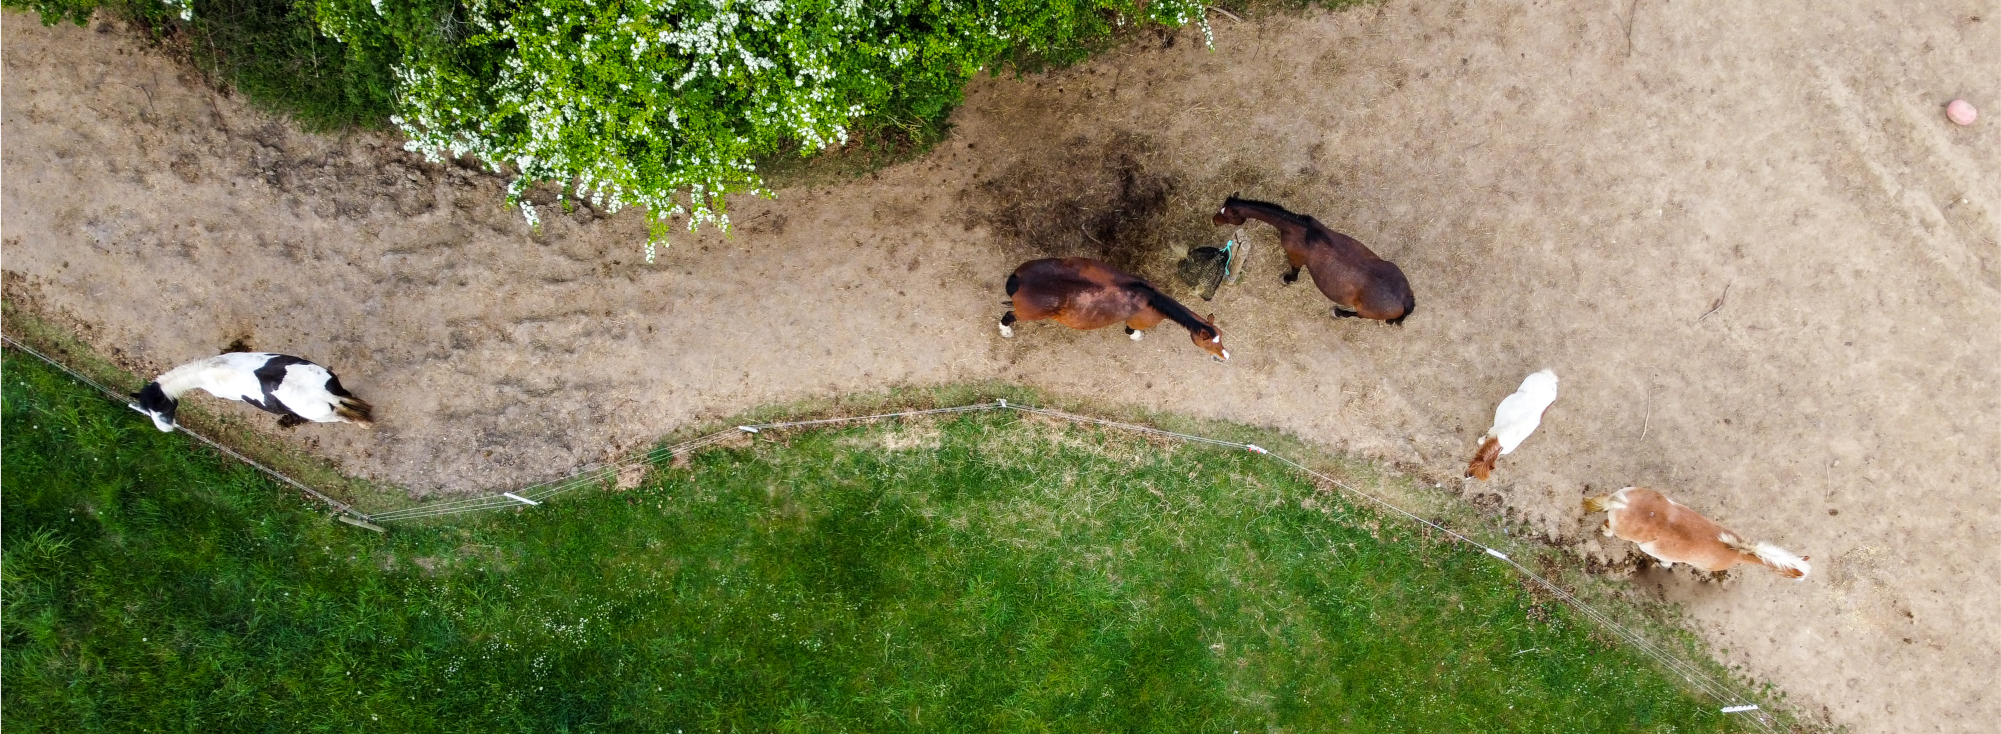 Horses on a track from above